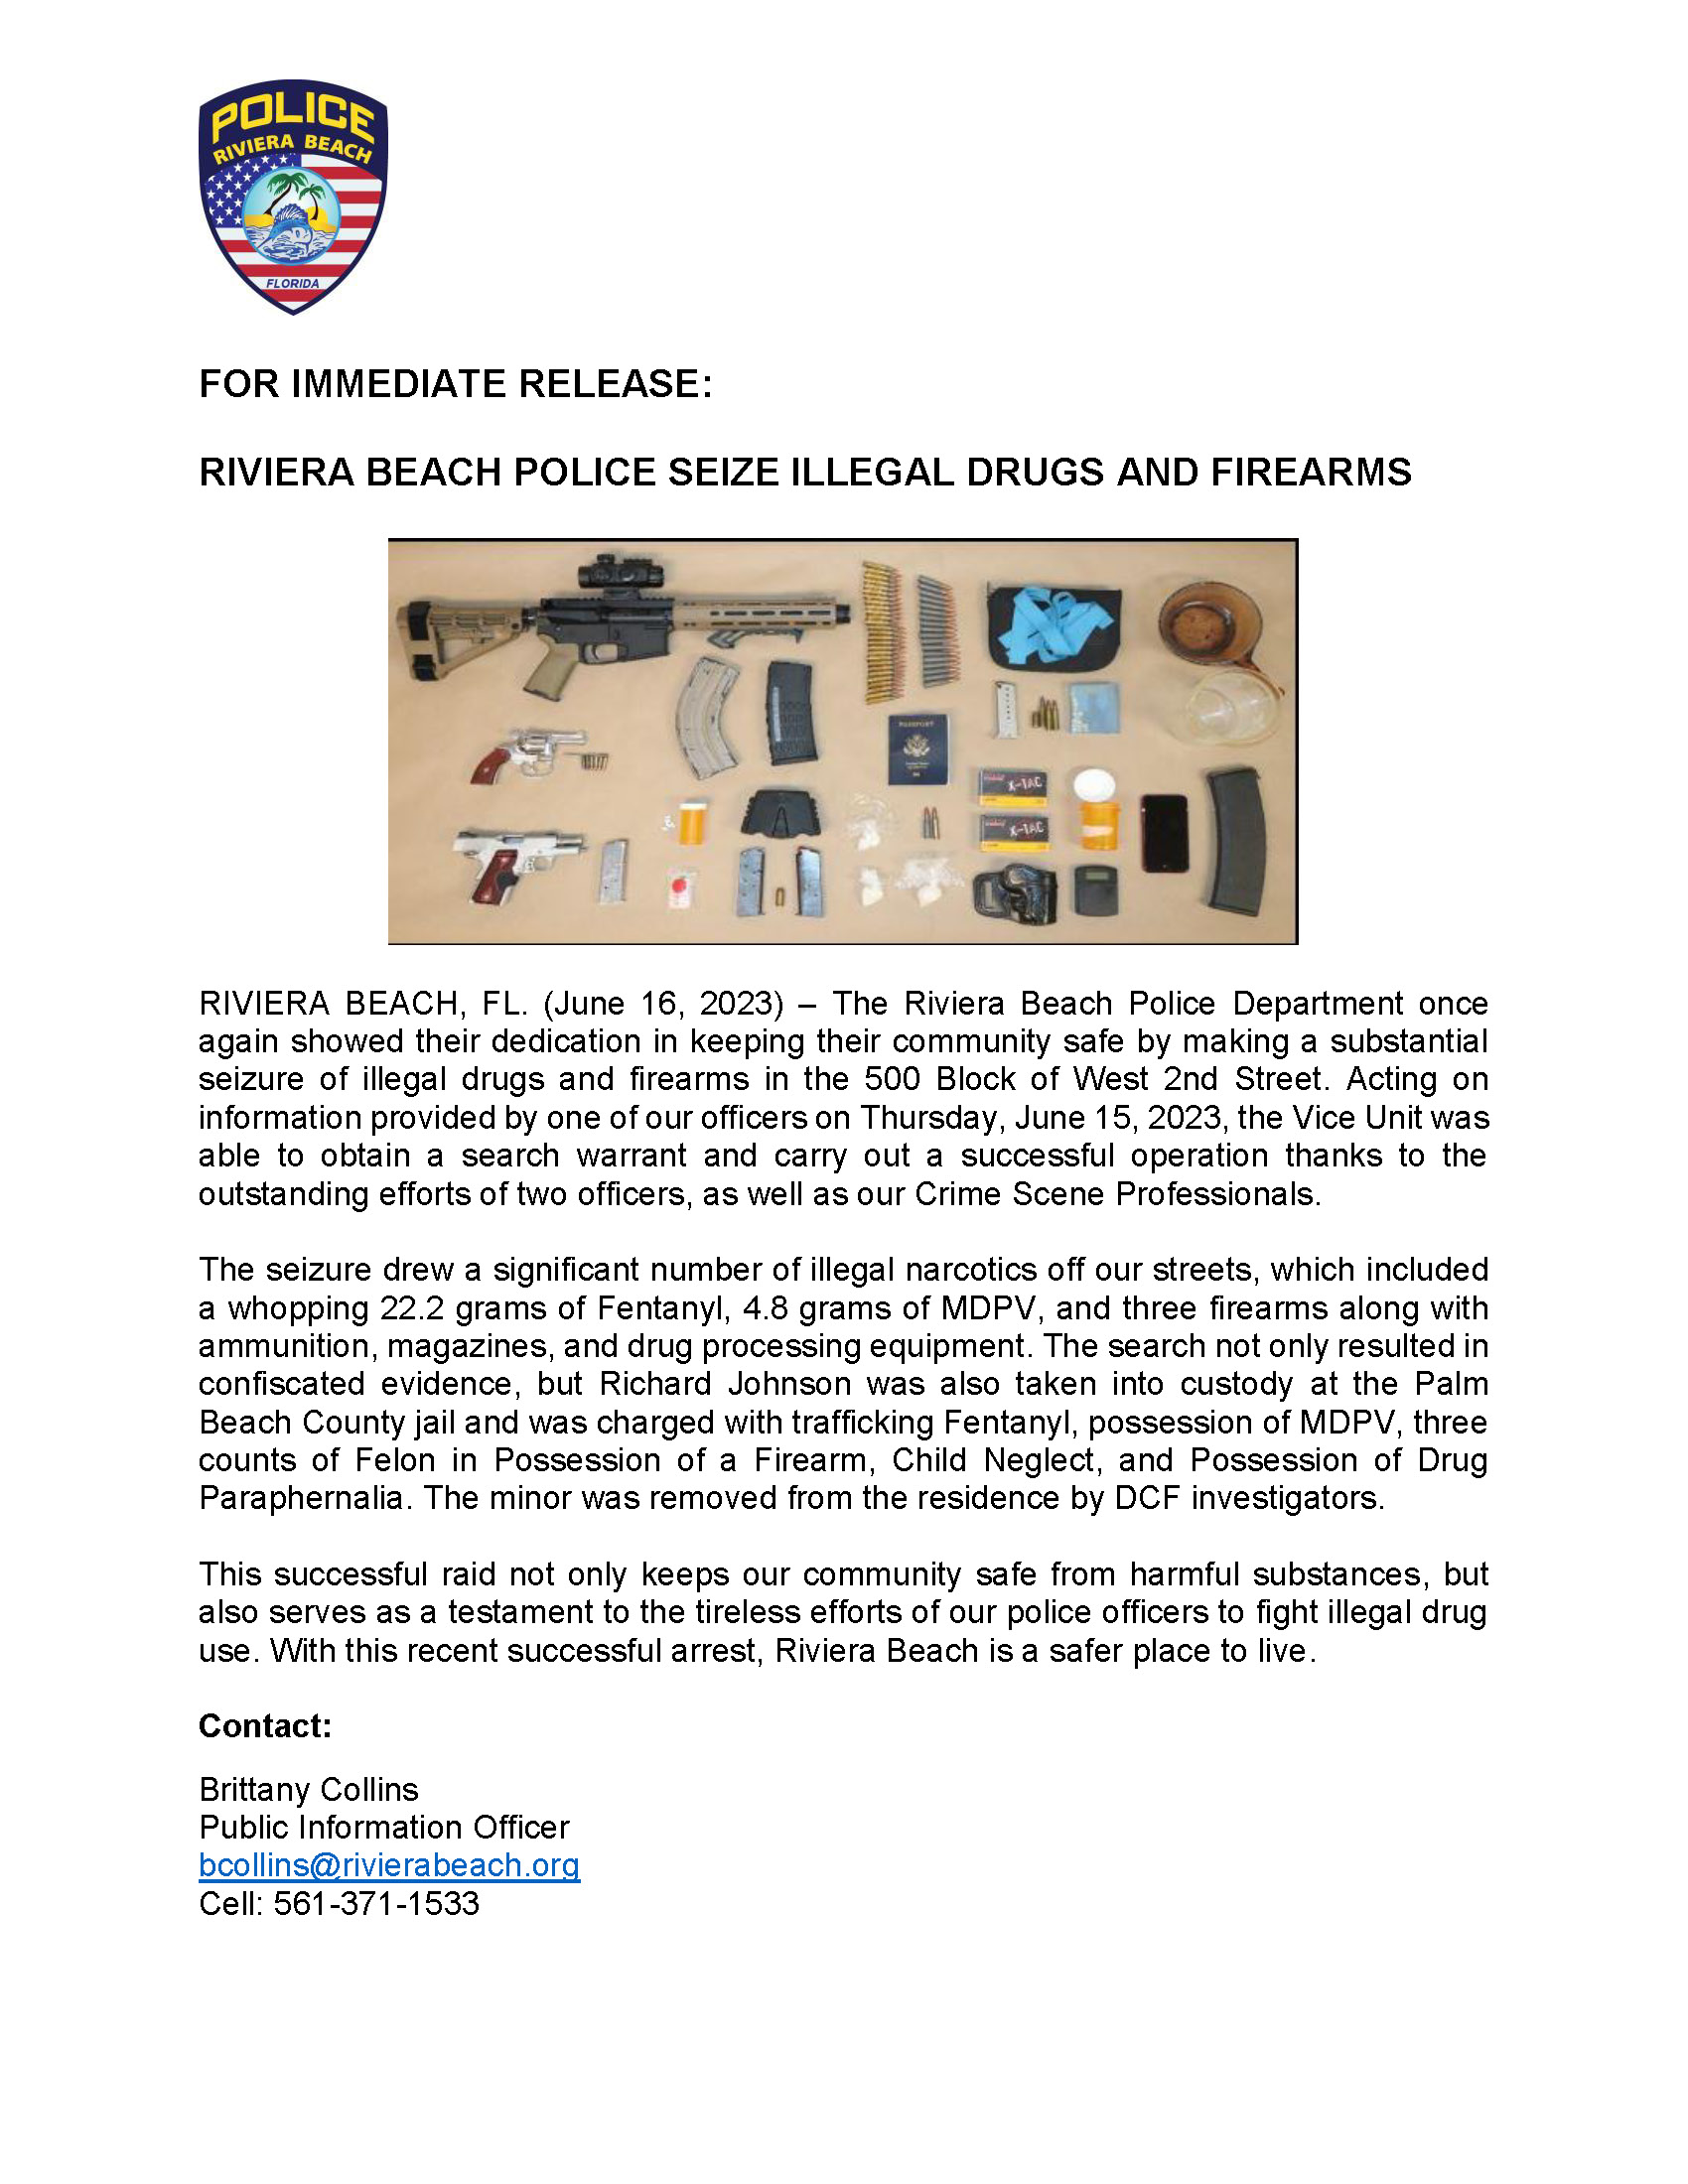 FOR IMMEDIATE RELEASE: RIVIERA BEACH POLICE SEIZE ILLEGAL DRUGS AND FIREARMS RIVIERA BEACH, FL. (June 16, 2023) – The Riviera Beach Police Department once again showed their dedication in keeping their community safe by making a substantial seizure of illegal drugs and firearms in the 500 Block of West 2nd Street. Acting on information provided by one of our officers on Thursday, June 15, 2023, the Vice Unit was able to obtain a search warrant and carry out a successful operation thanks to the outstanding efforts of two officers, as well as our Crime Scene Professionals. The seizure drew a significant number of illegal narcotics off our streets, which included a whopping 22.2 grams of Fentanyl, 4.8 grams of MDPV, and three firearms along with ammunition, magazines, and drug processing equipment. The search not only resulted in confiscated evidence, but Richard Johnson was also taken into custody at the Palm Beach County jail and was charged with trafficking Fentanyl, possession of MDPV, three counts of Felon in Possession of a Firearm, Child Neglect, and Possession of Drug Paraphernalia. The minor was removed from the residence by DCF investigators. This successful raid not only keeps our community safe from harmful substances, but also serves as a testament to the tireless efforts of our police officers to fight illegal drug use. With this recent successful arrest, Riviera Beach is a safer place to live. Contact: Brittany Collins Public Information Officer bcollins@rivierabeach.org Cell: 561-371-1533